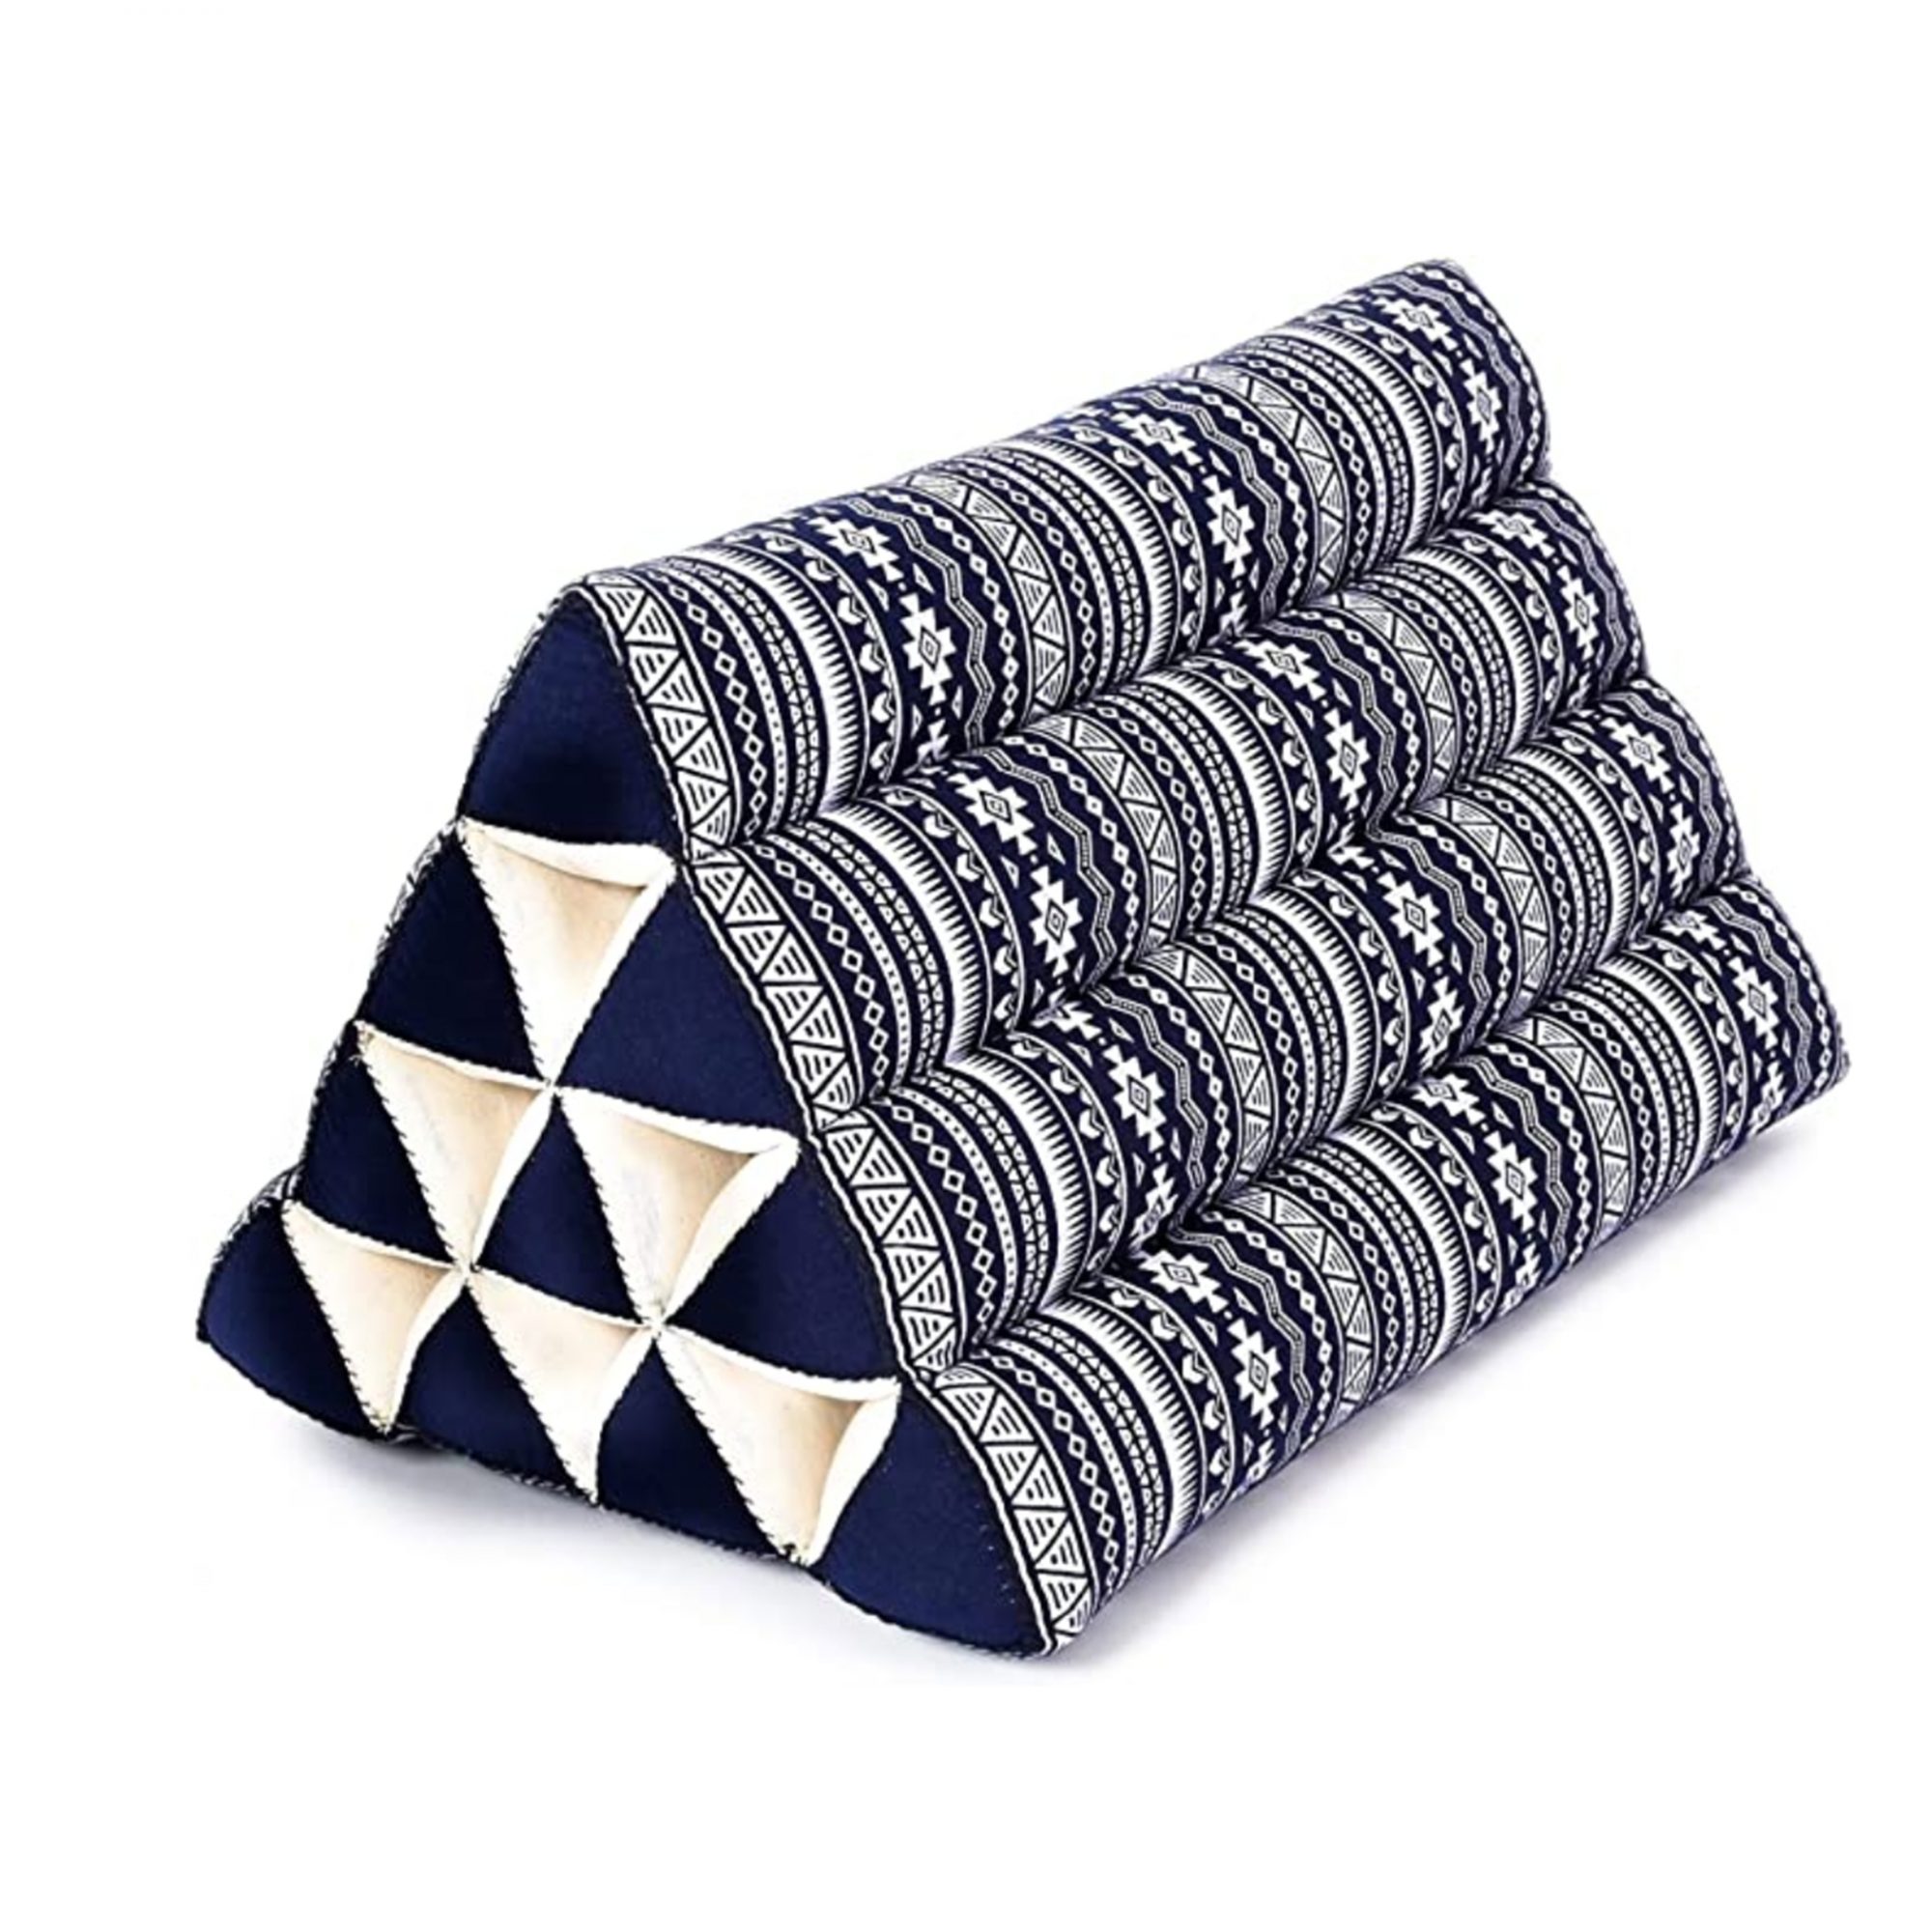 Triangle Pillow 2000 ?quality=82&strip=all